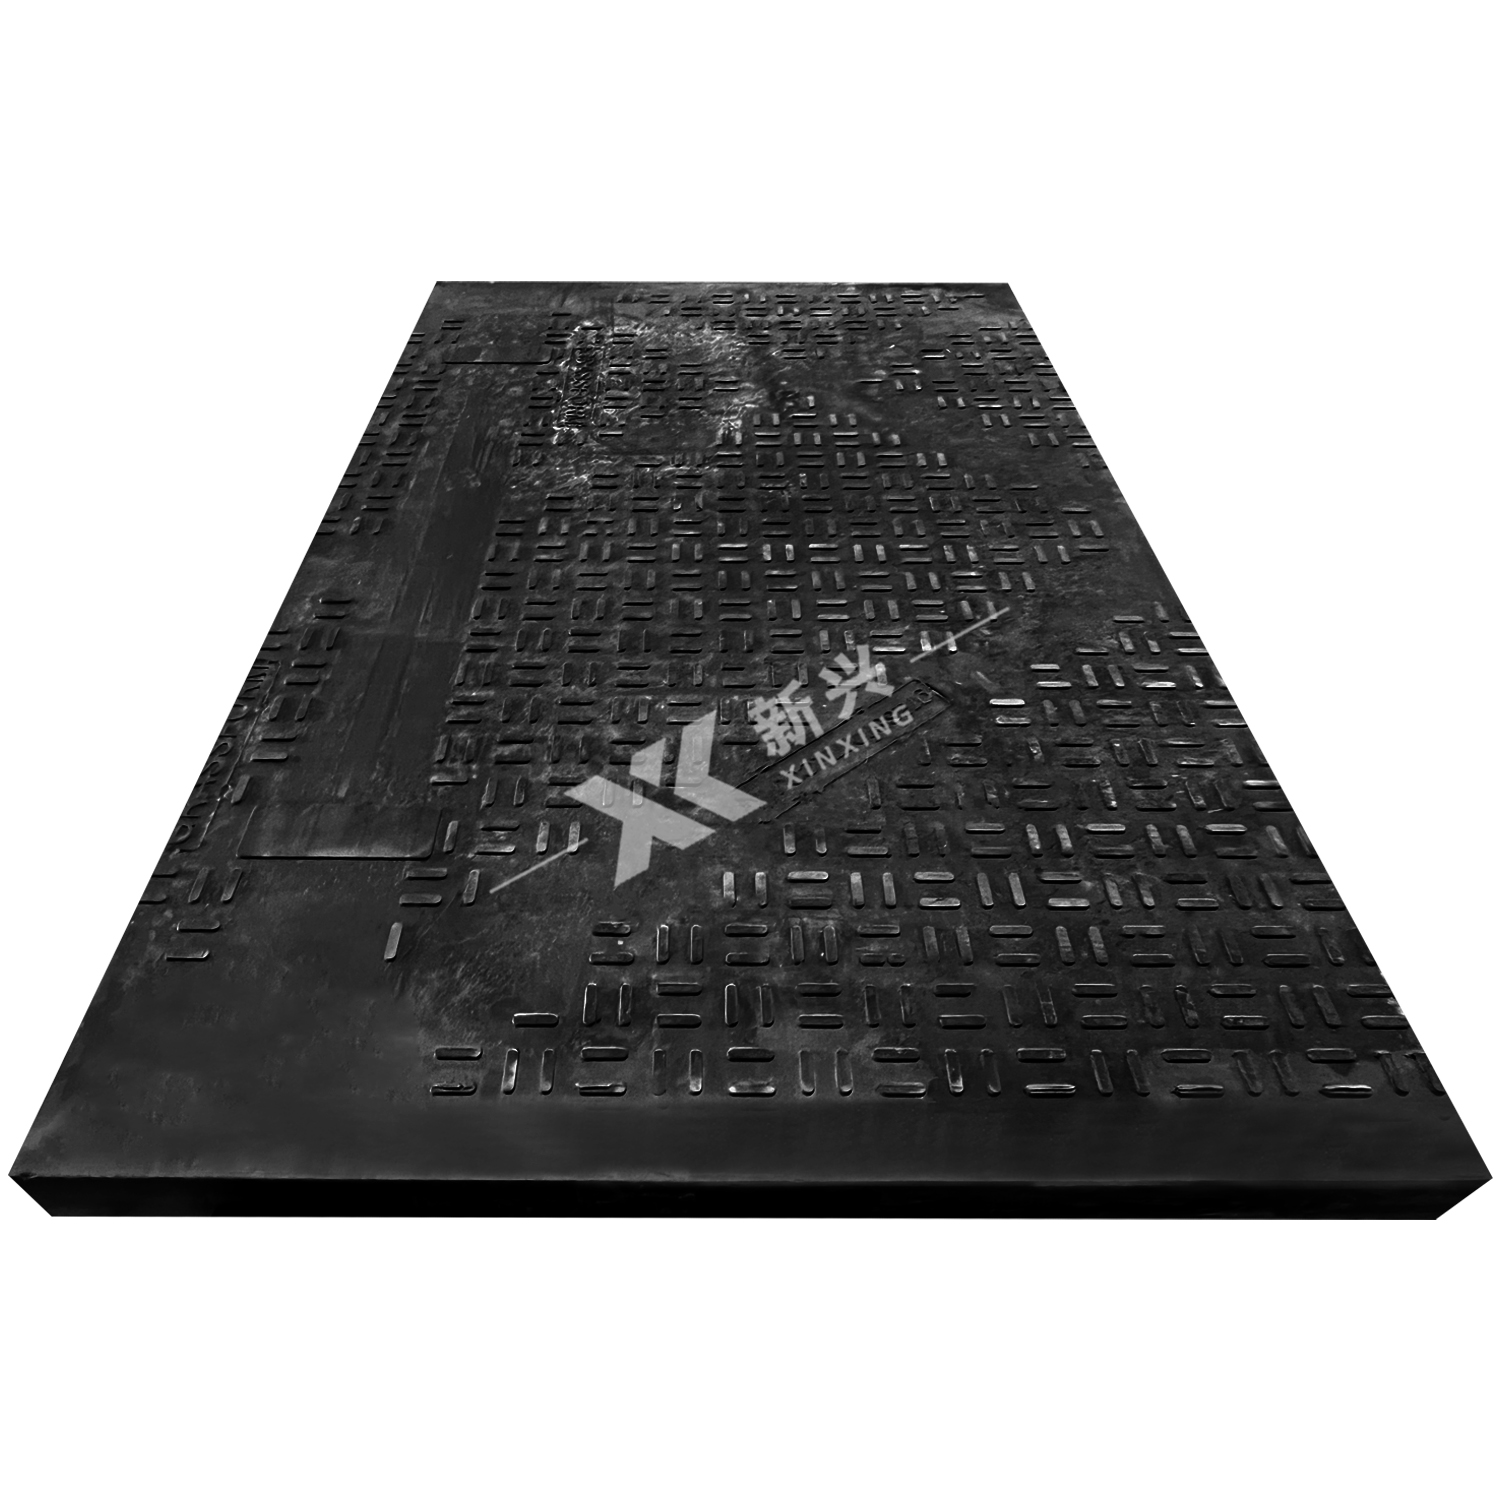 Construction Protection Hdpe Material Ground Protection Mats